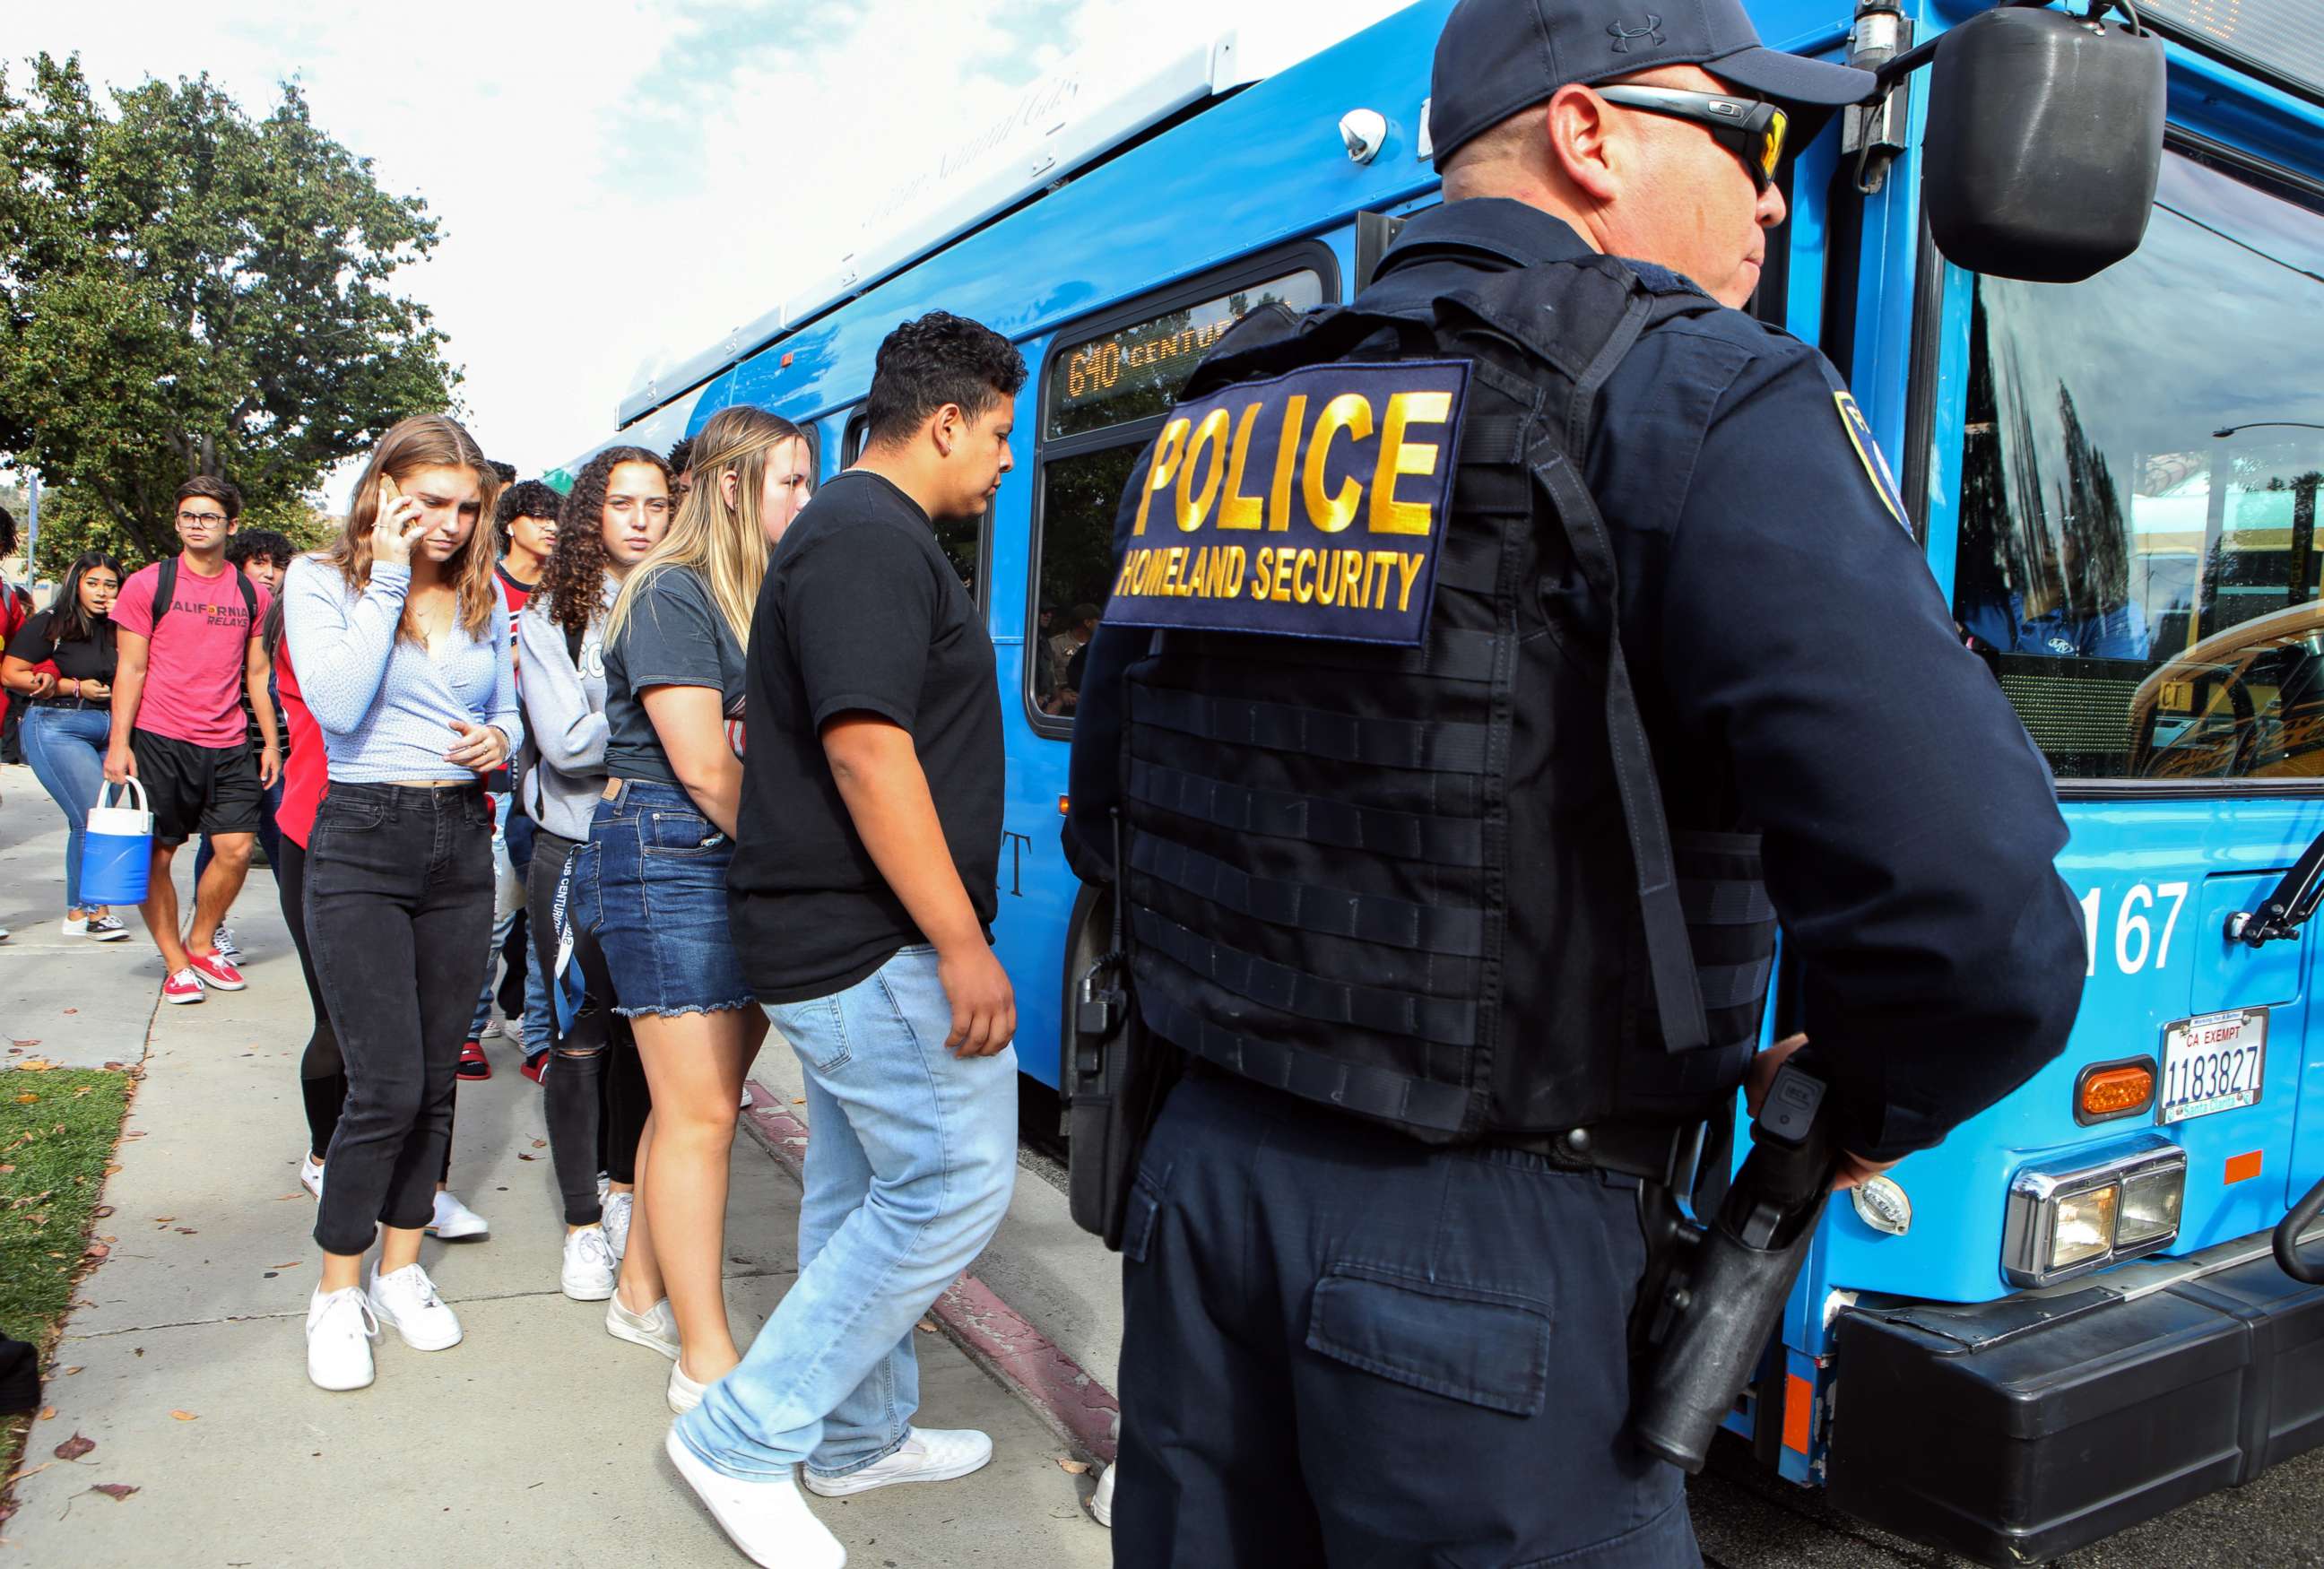 PHOTO: Students are evacuated from Saugus High School onto a bus after a shooting at the school left two students dead and three wounded on Nov. 14, 2019, in Santa Clarita, Calif.